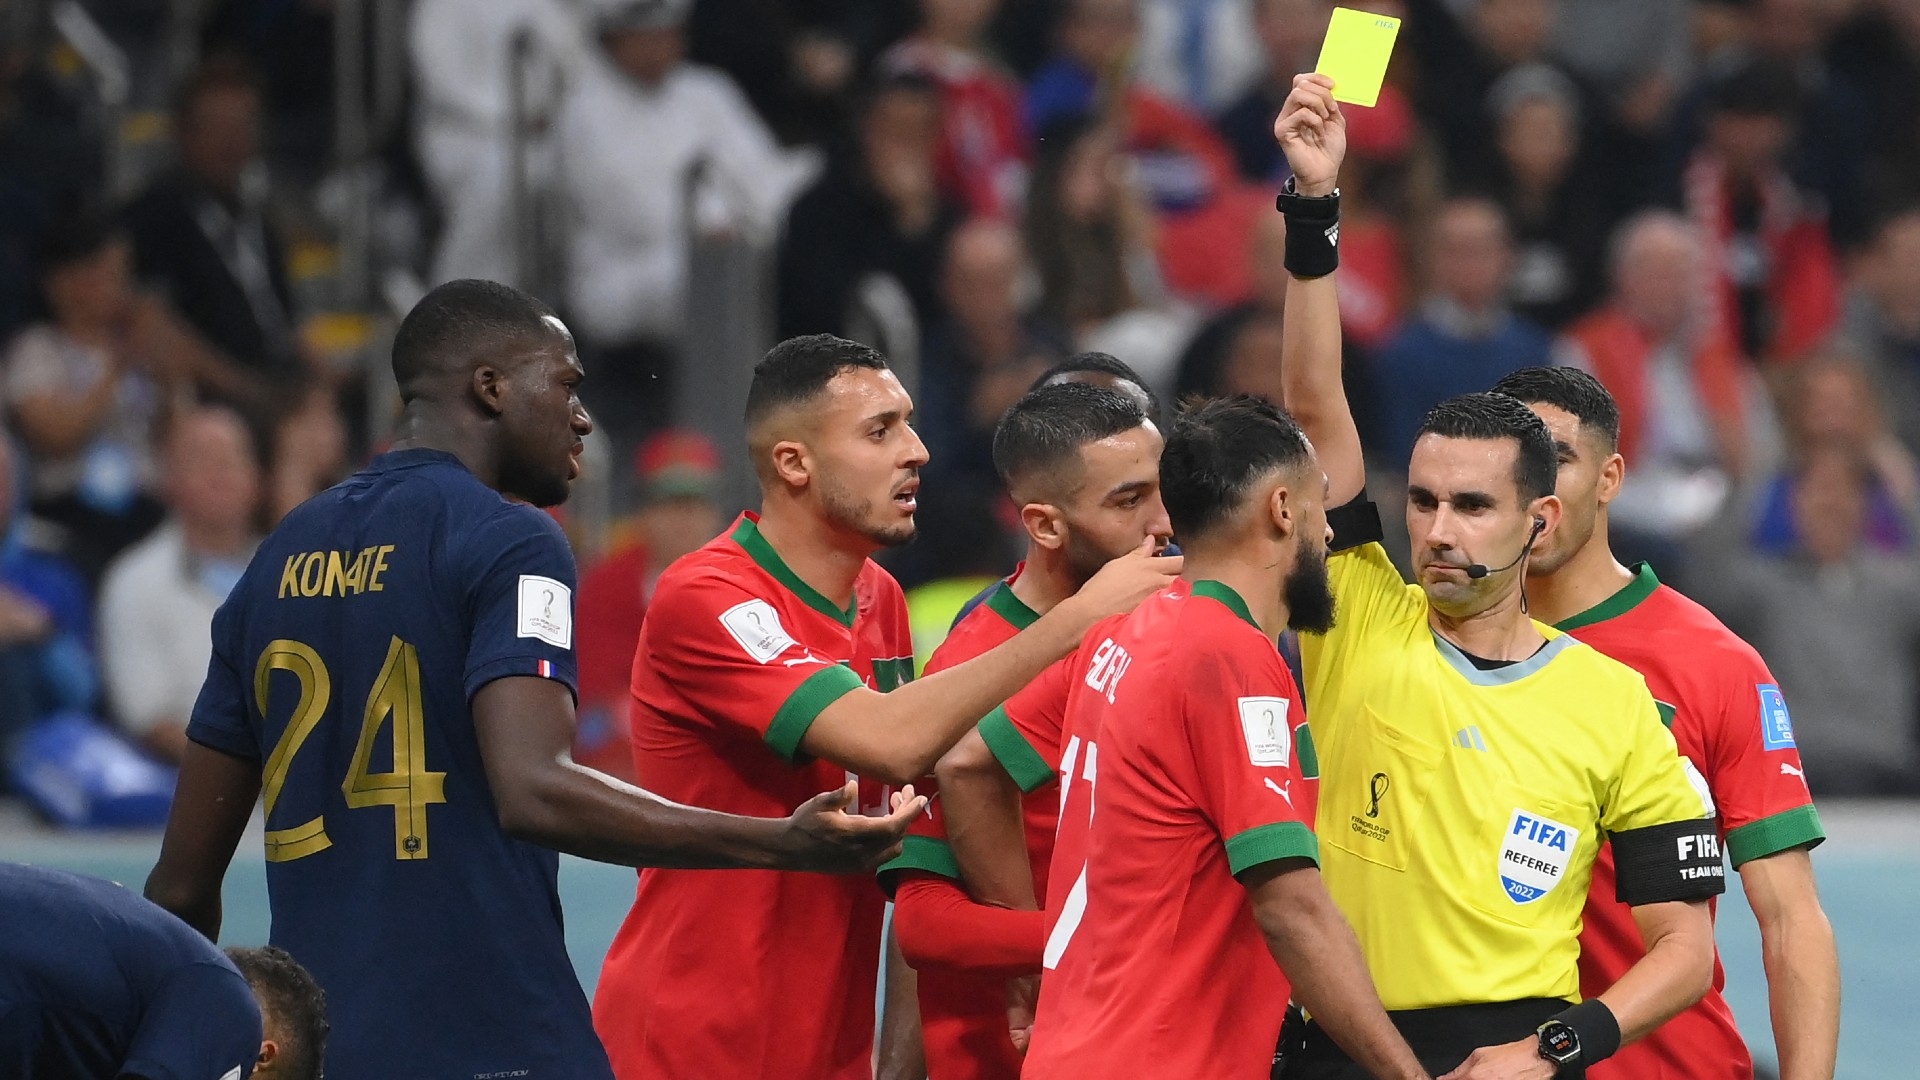 World Cup 2022 Morocco complains to Fifa over referee decisions during France semi-final Middle East Eye